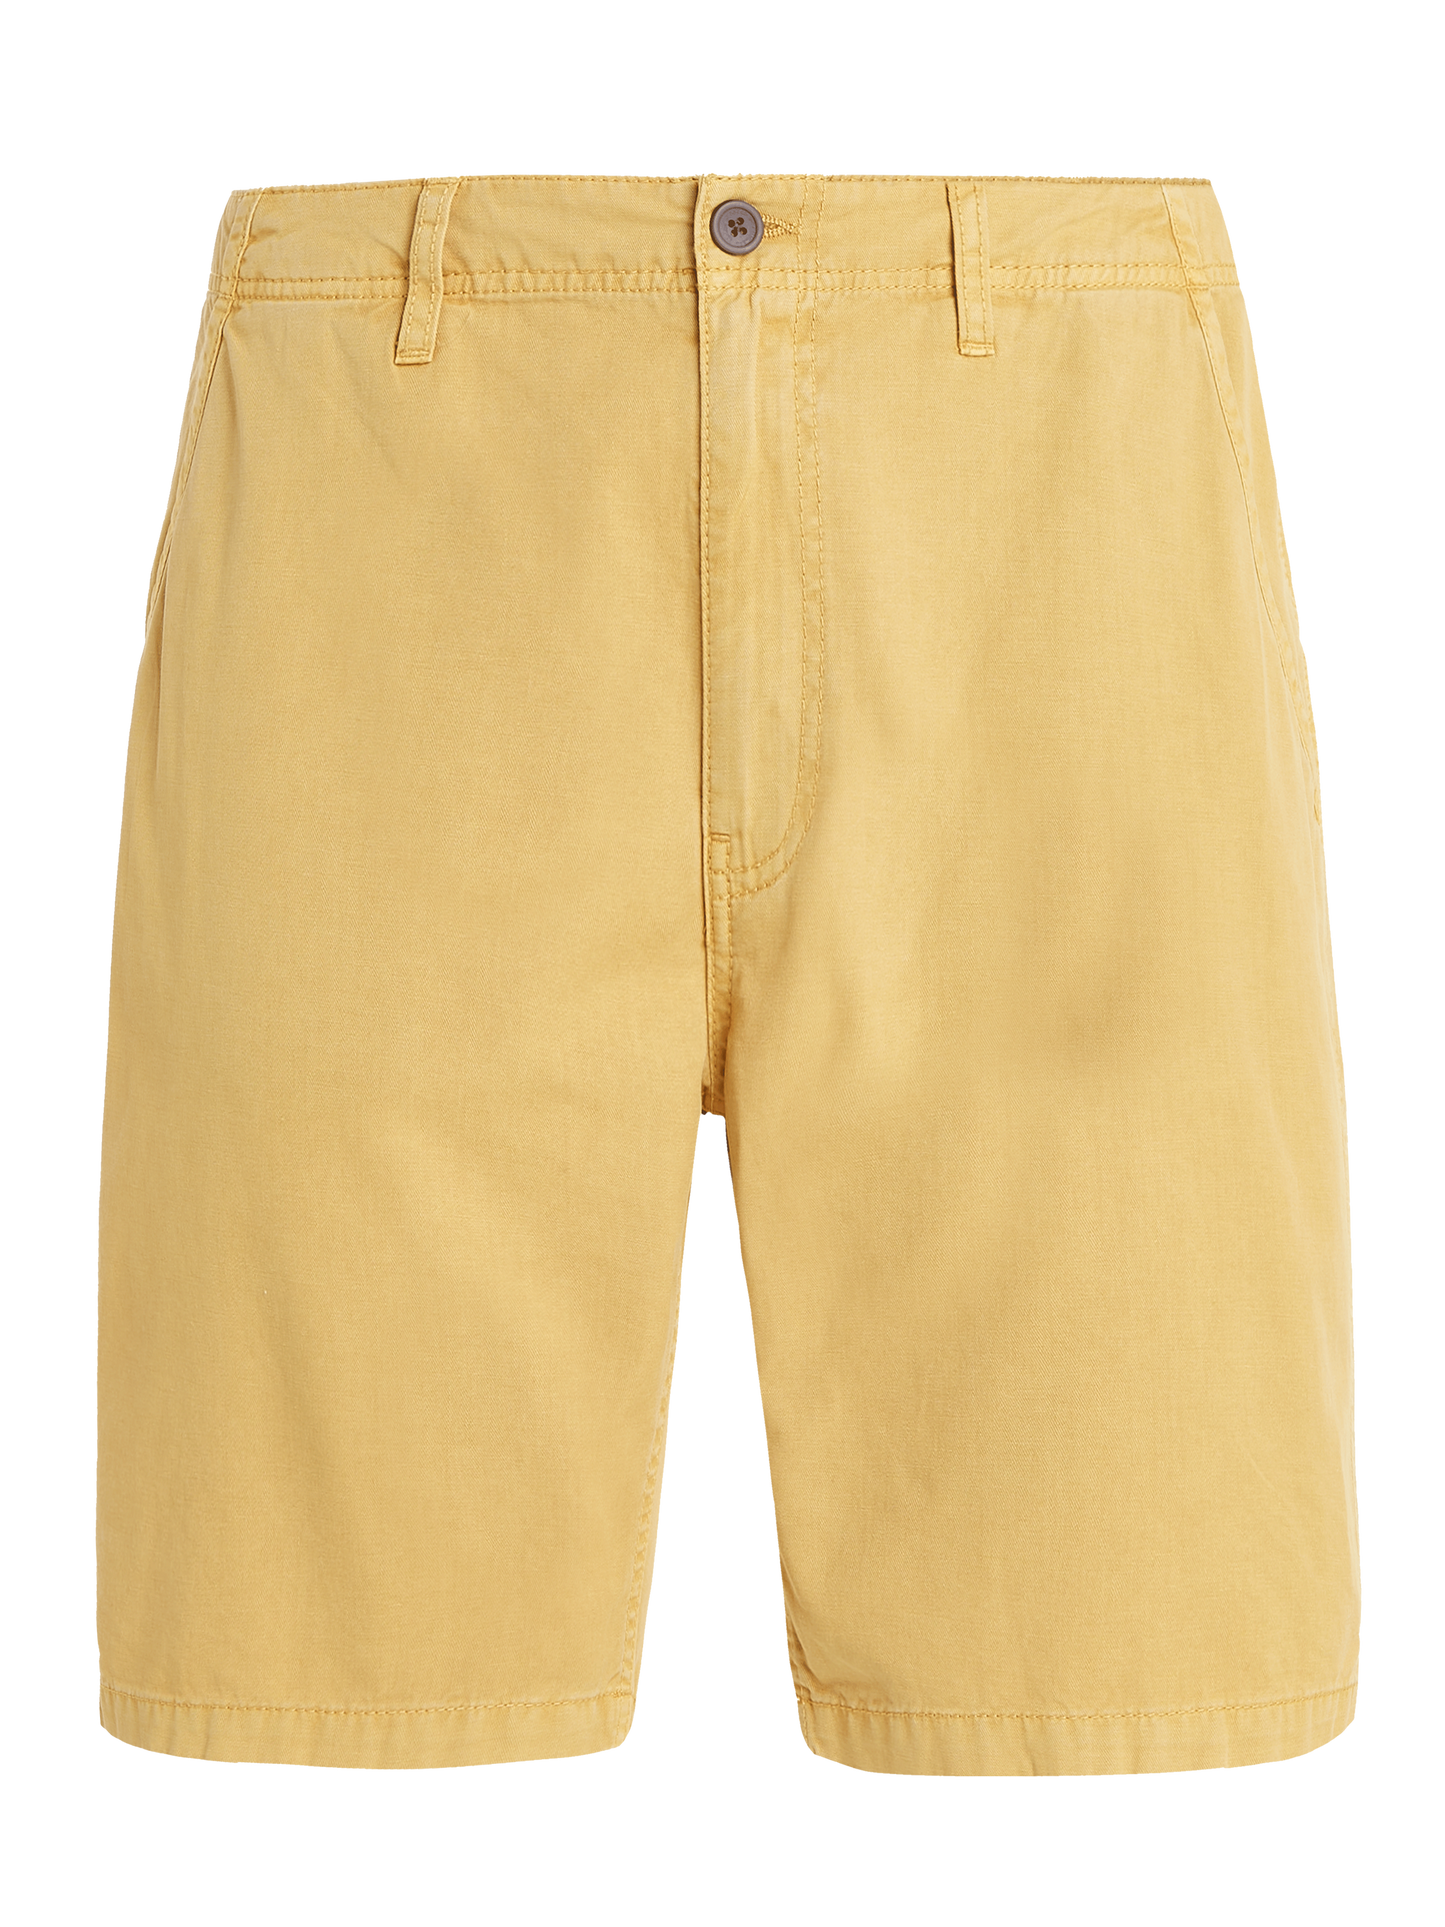 Protest Comie Shorts in Butter Yellow